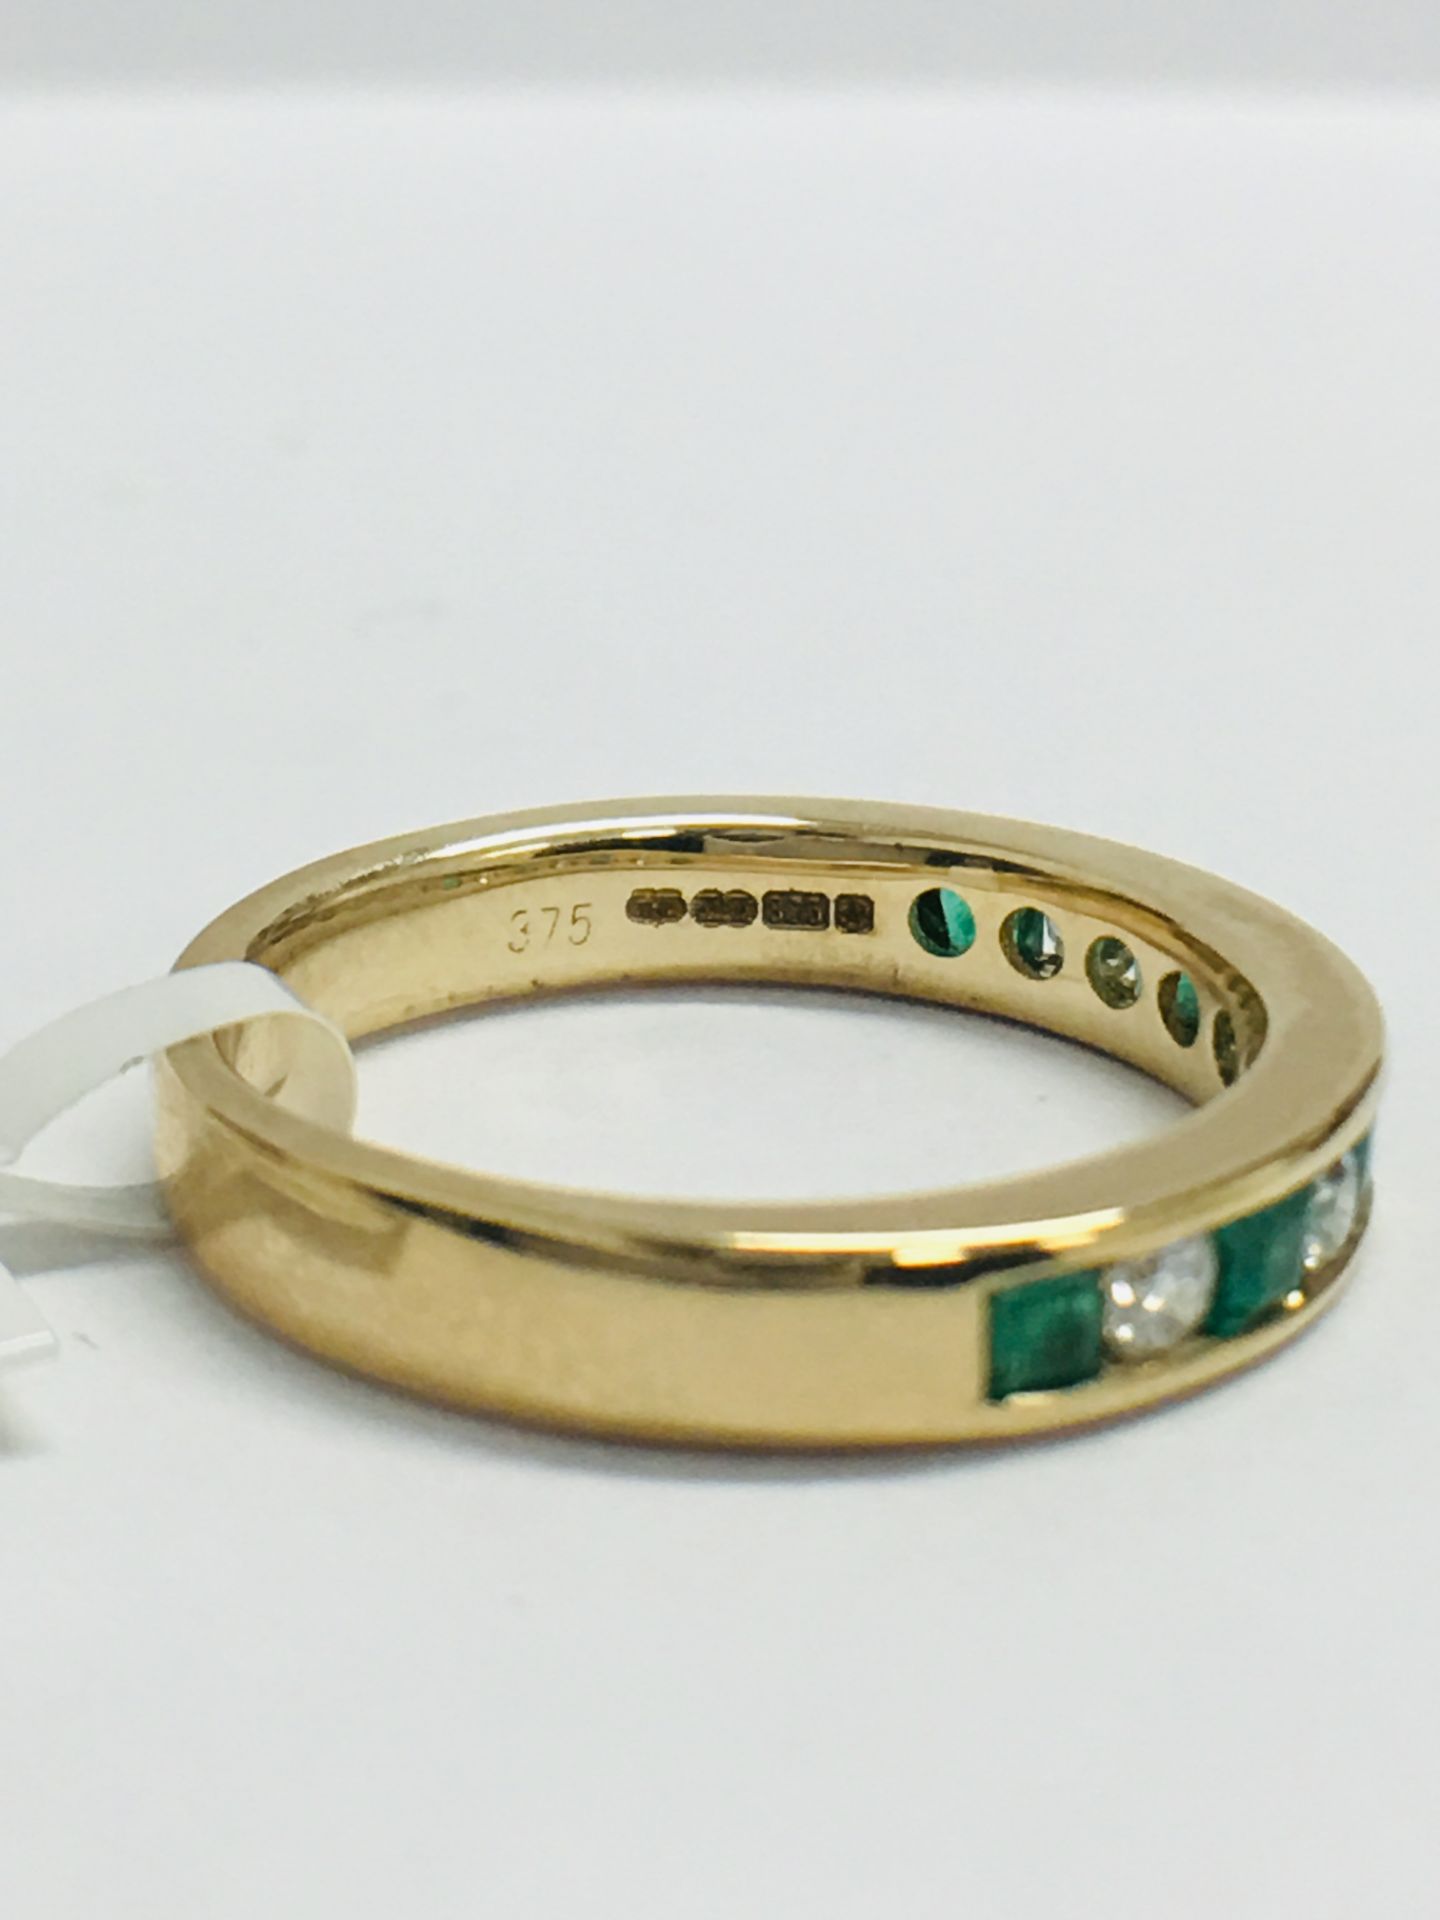 9ct Yellow Gold Emerald Diamond Channel Set Eternity Ring - Image 9 of 13